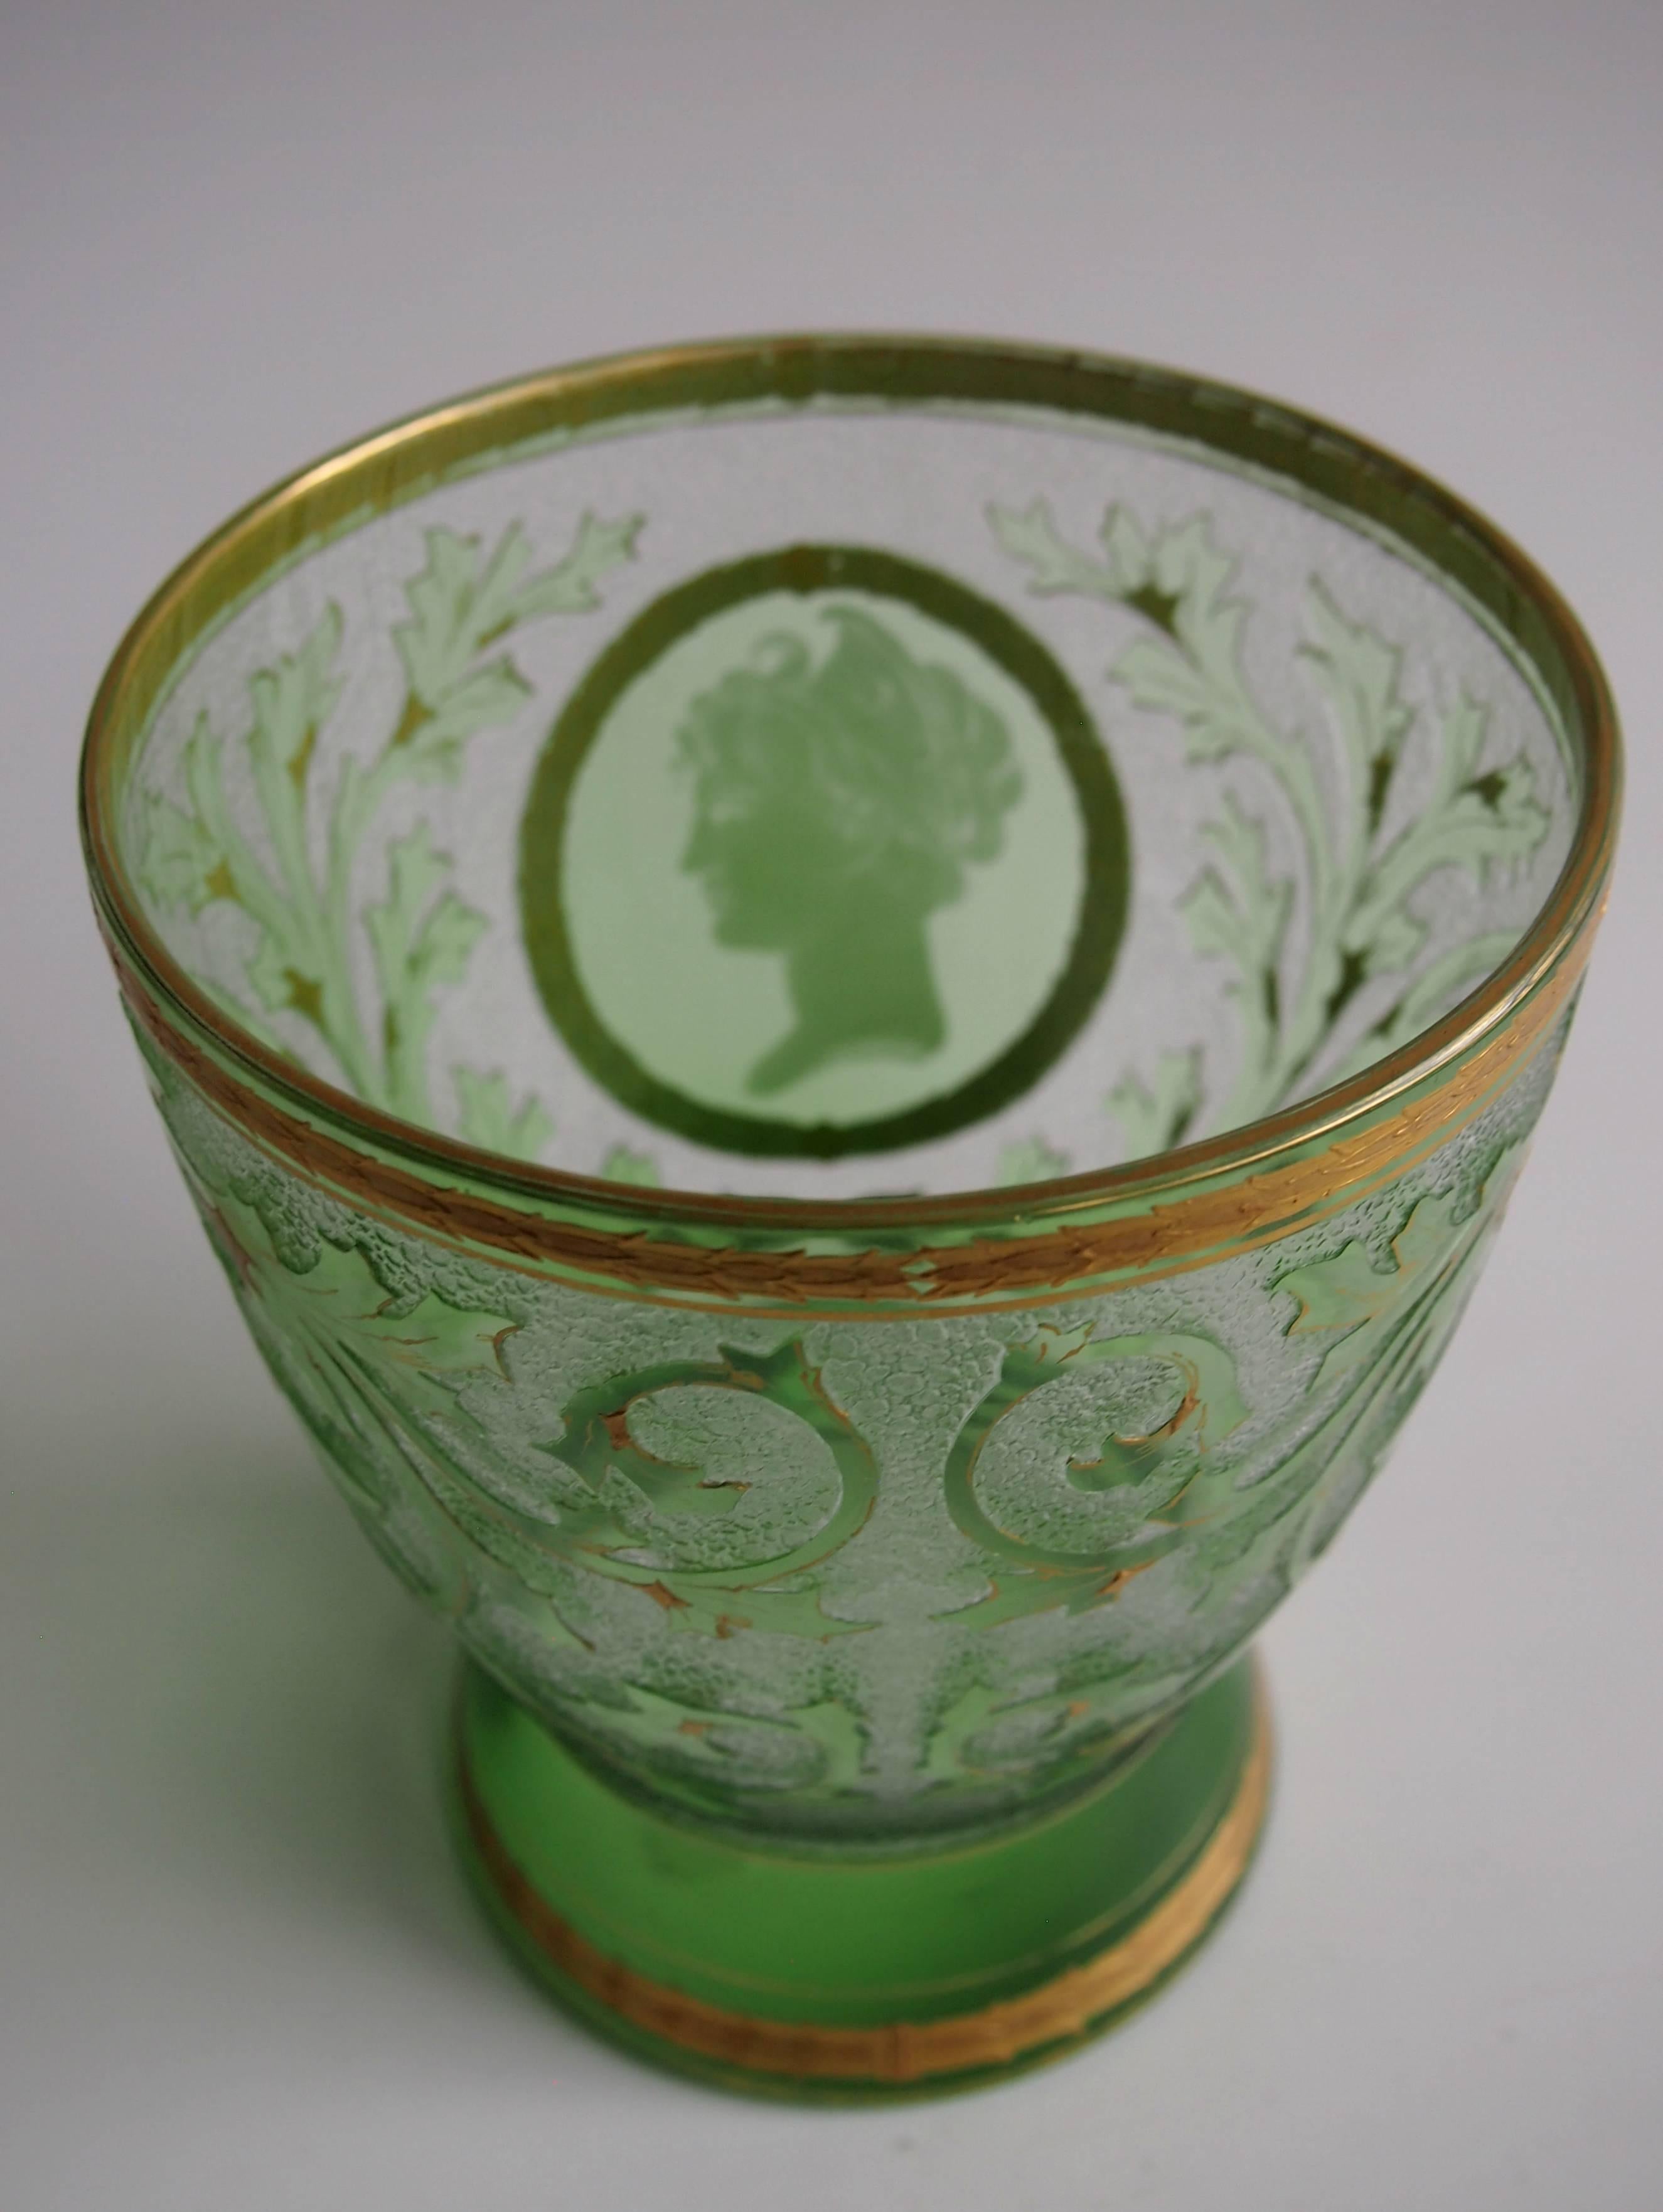 Art Nouveau Bohemian 'Helmet' Cameo Glass Vase by Riedel In Good Condition For Sale In London, GB